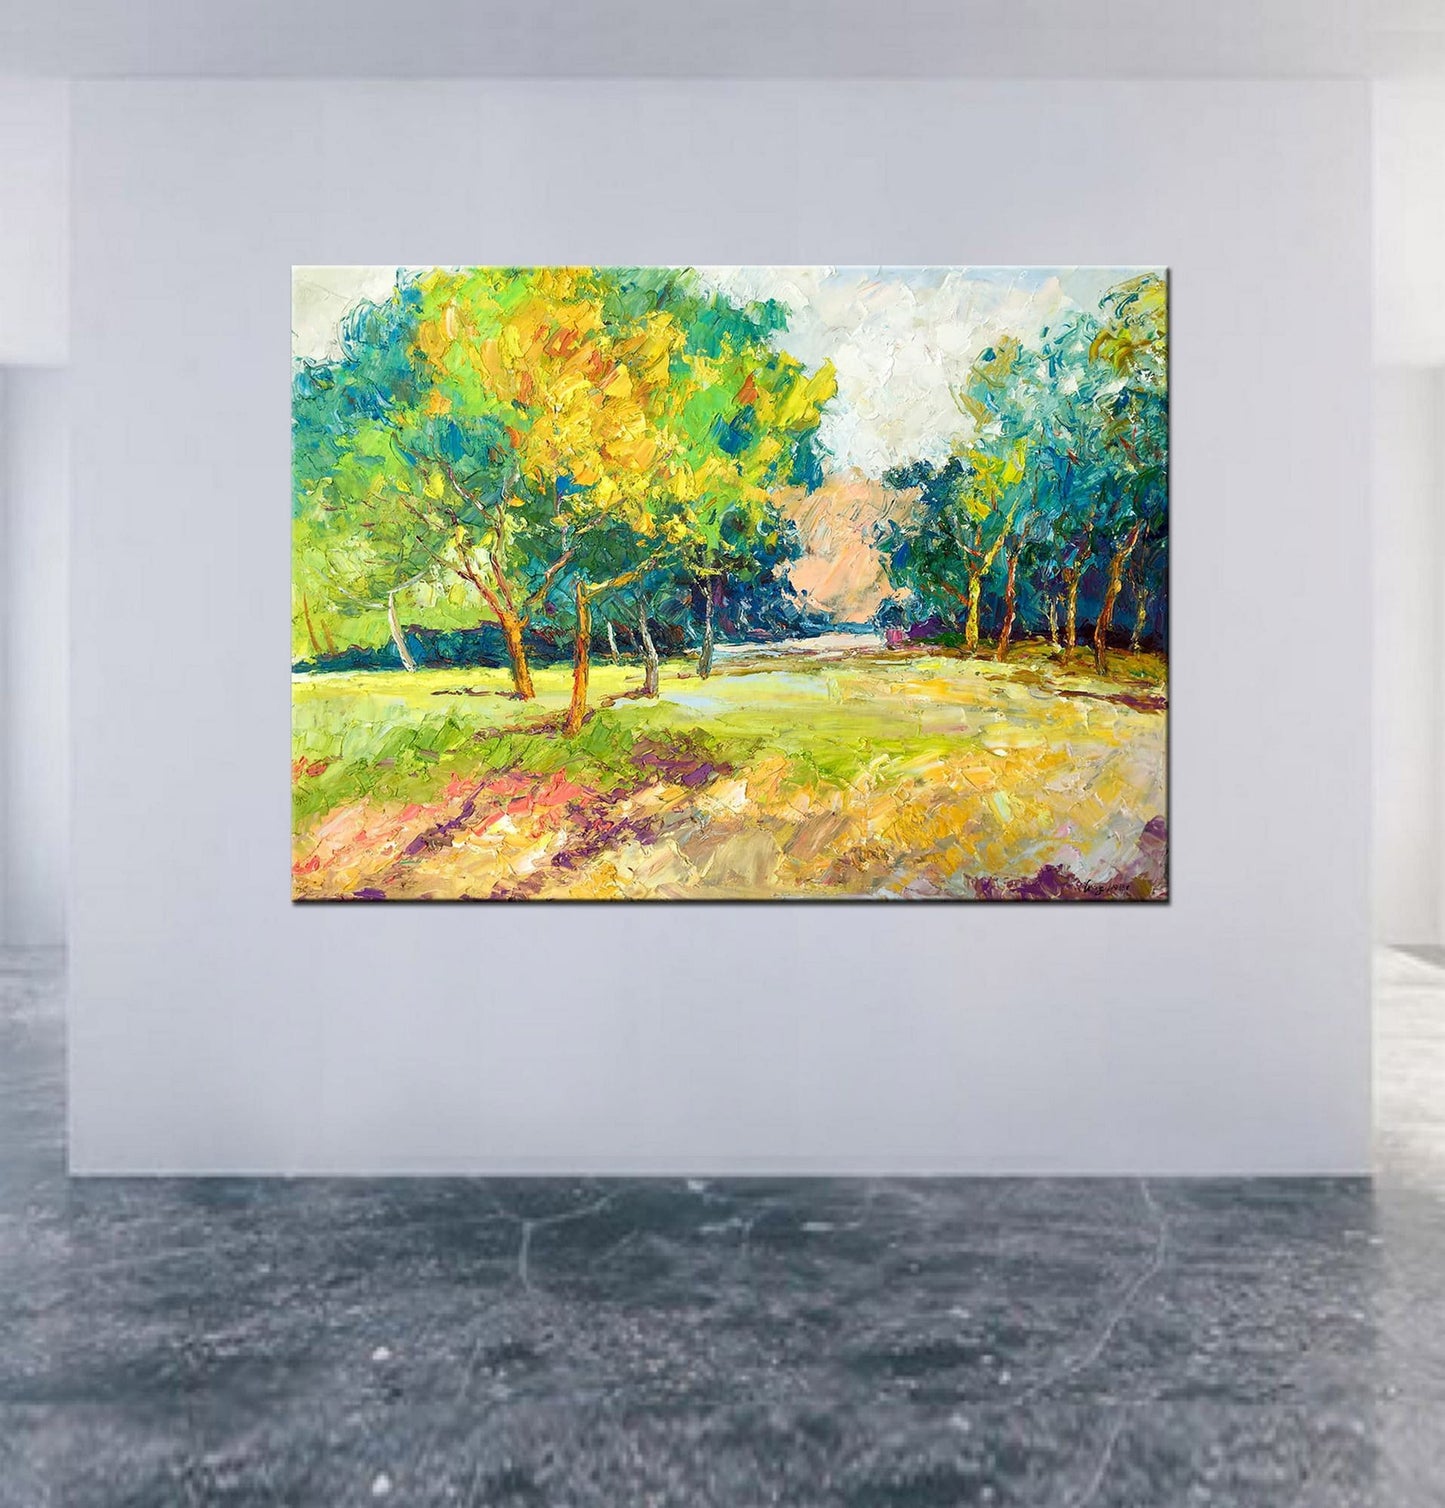 Landscape Oil Painting Spring Village, Canvas Painting, Paintings On Canvas, Abstract Landscape, Handmade Painting, Modern Wall Art, Texture